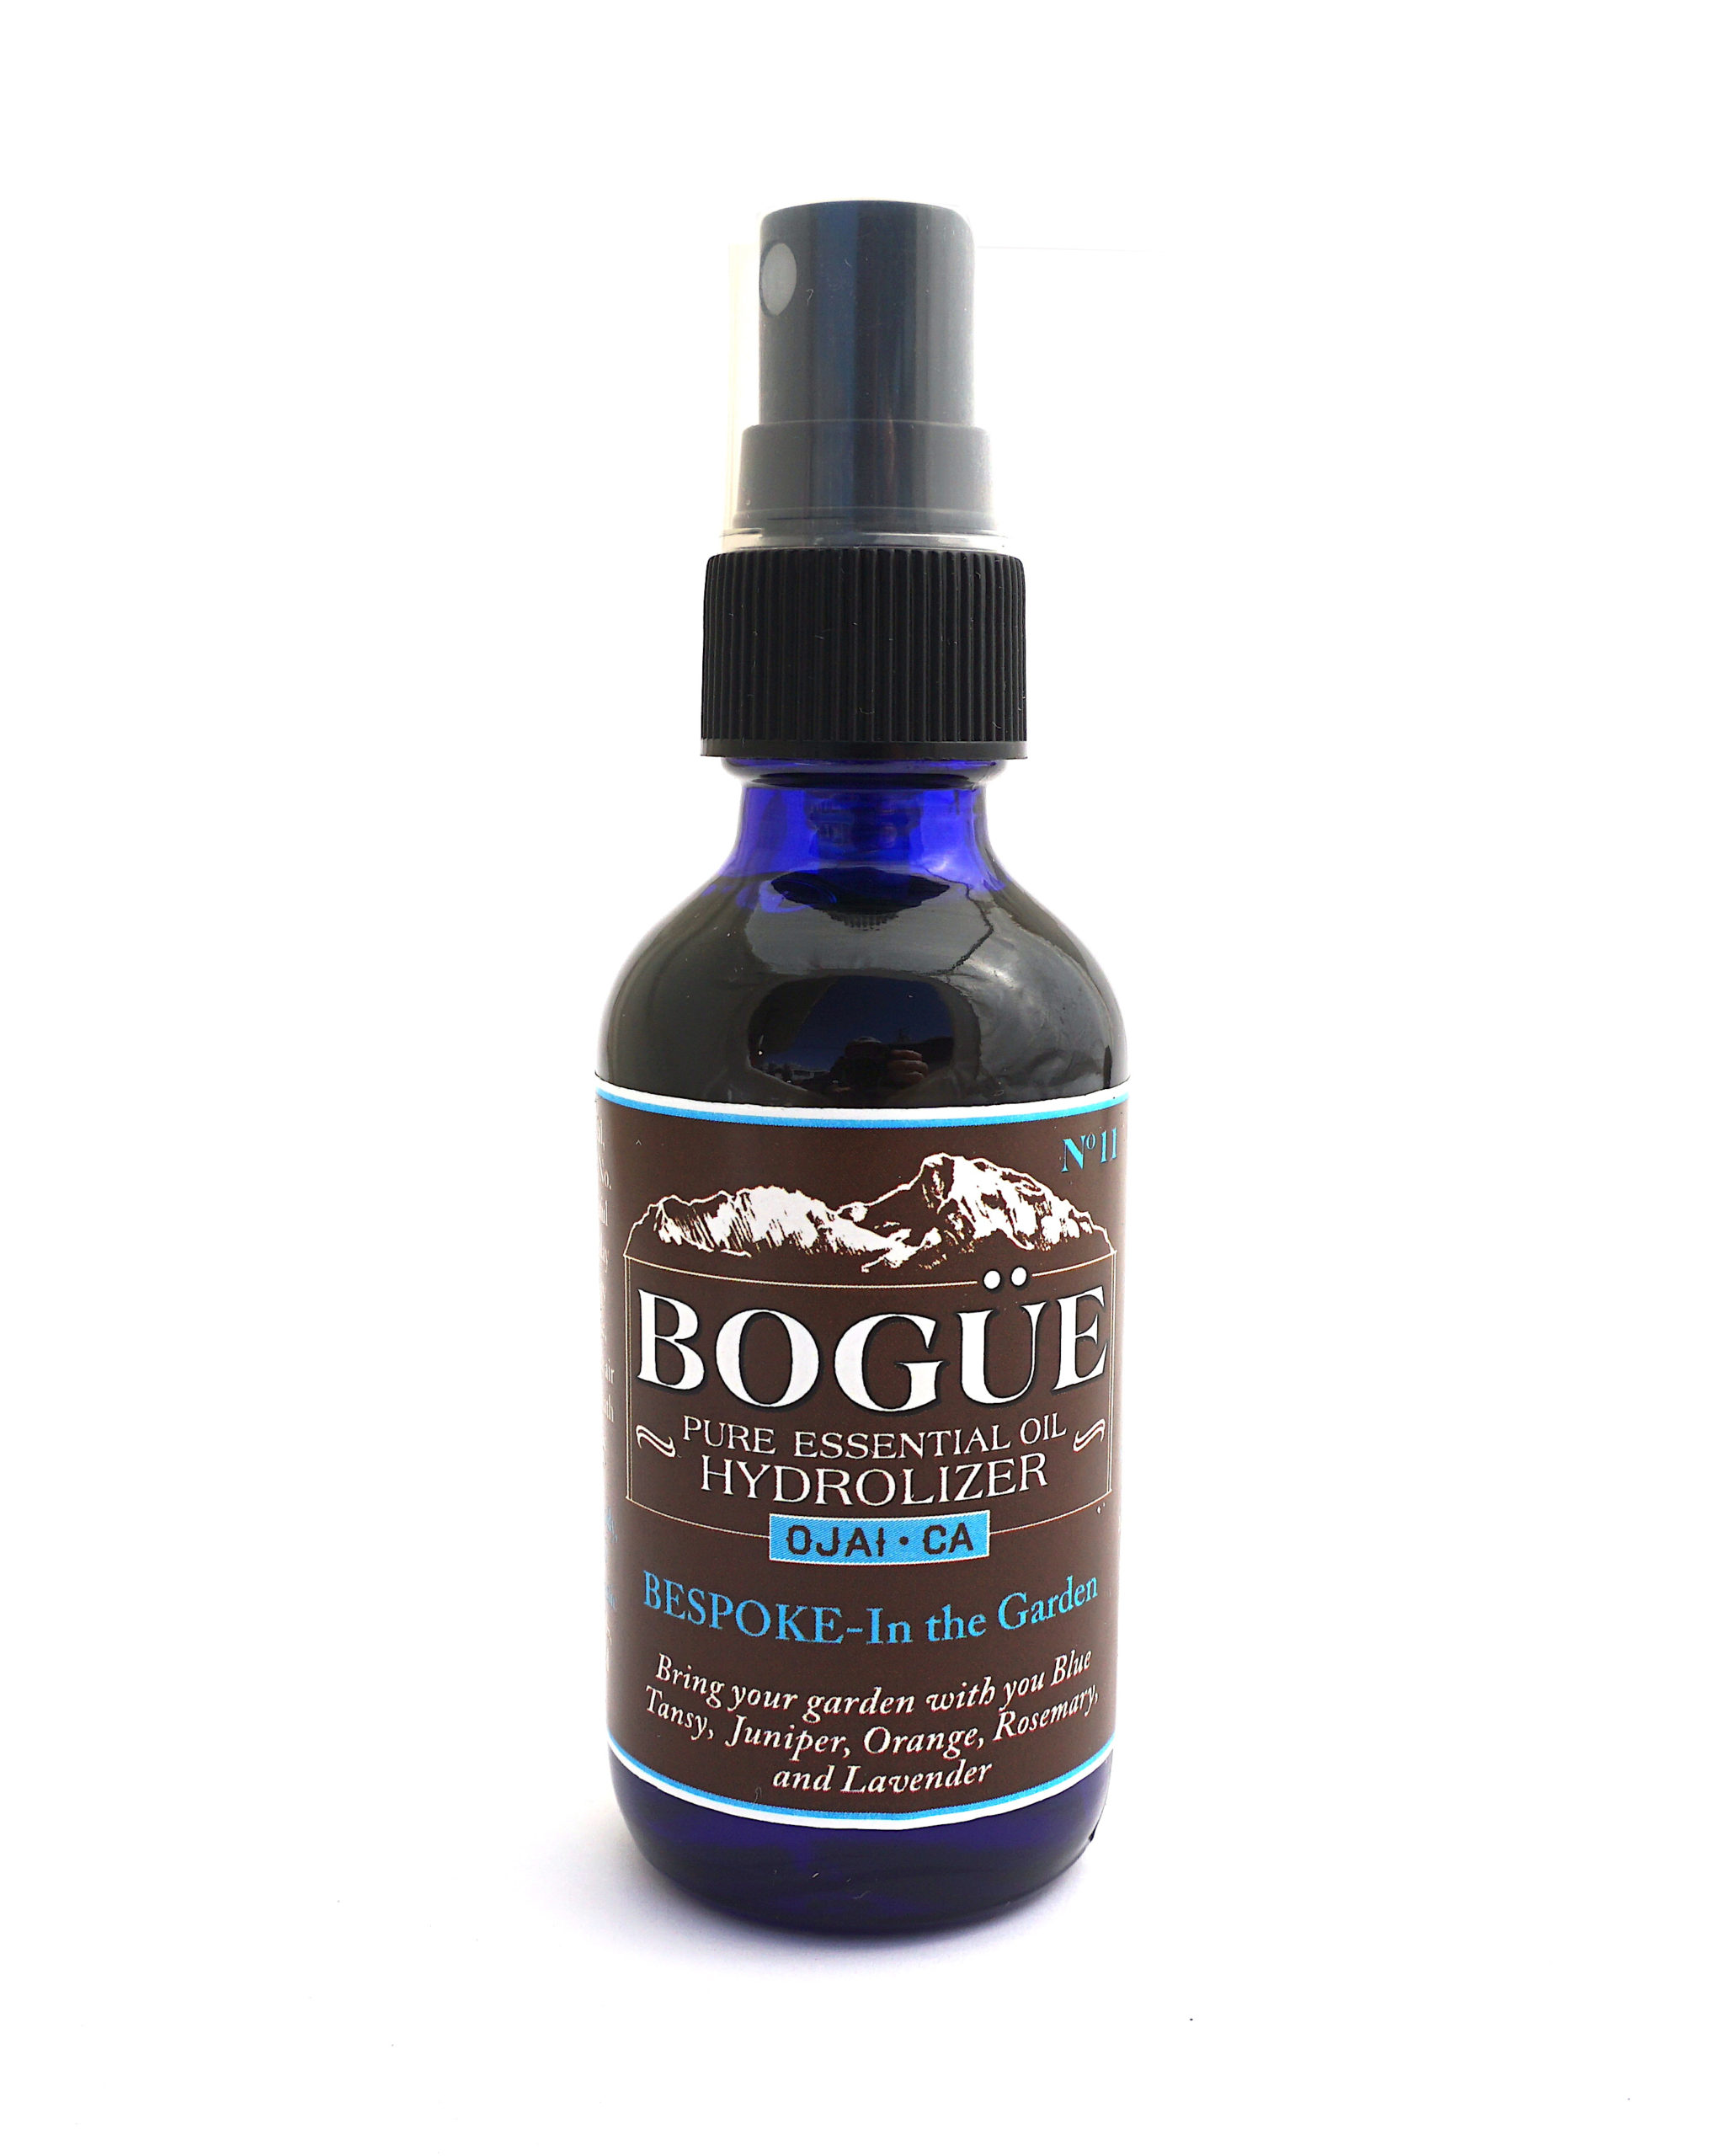 Pure Essential Oil Hydrolizer Spray Bogue BESPOKE No.11 In the Garden  Blend- Blue Tansy, Herbs and antiseptic/antibacterial Lavender & Tea Tree -  Bogue Milk Soap